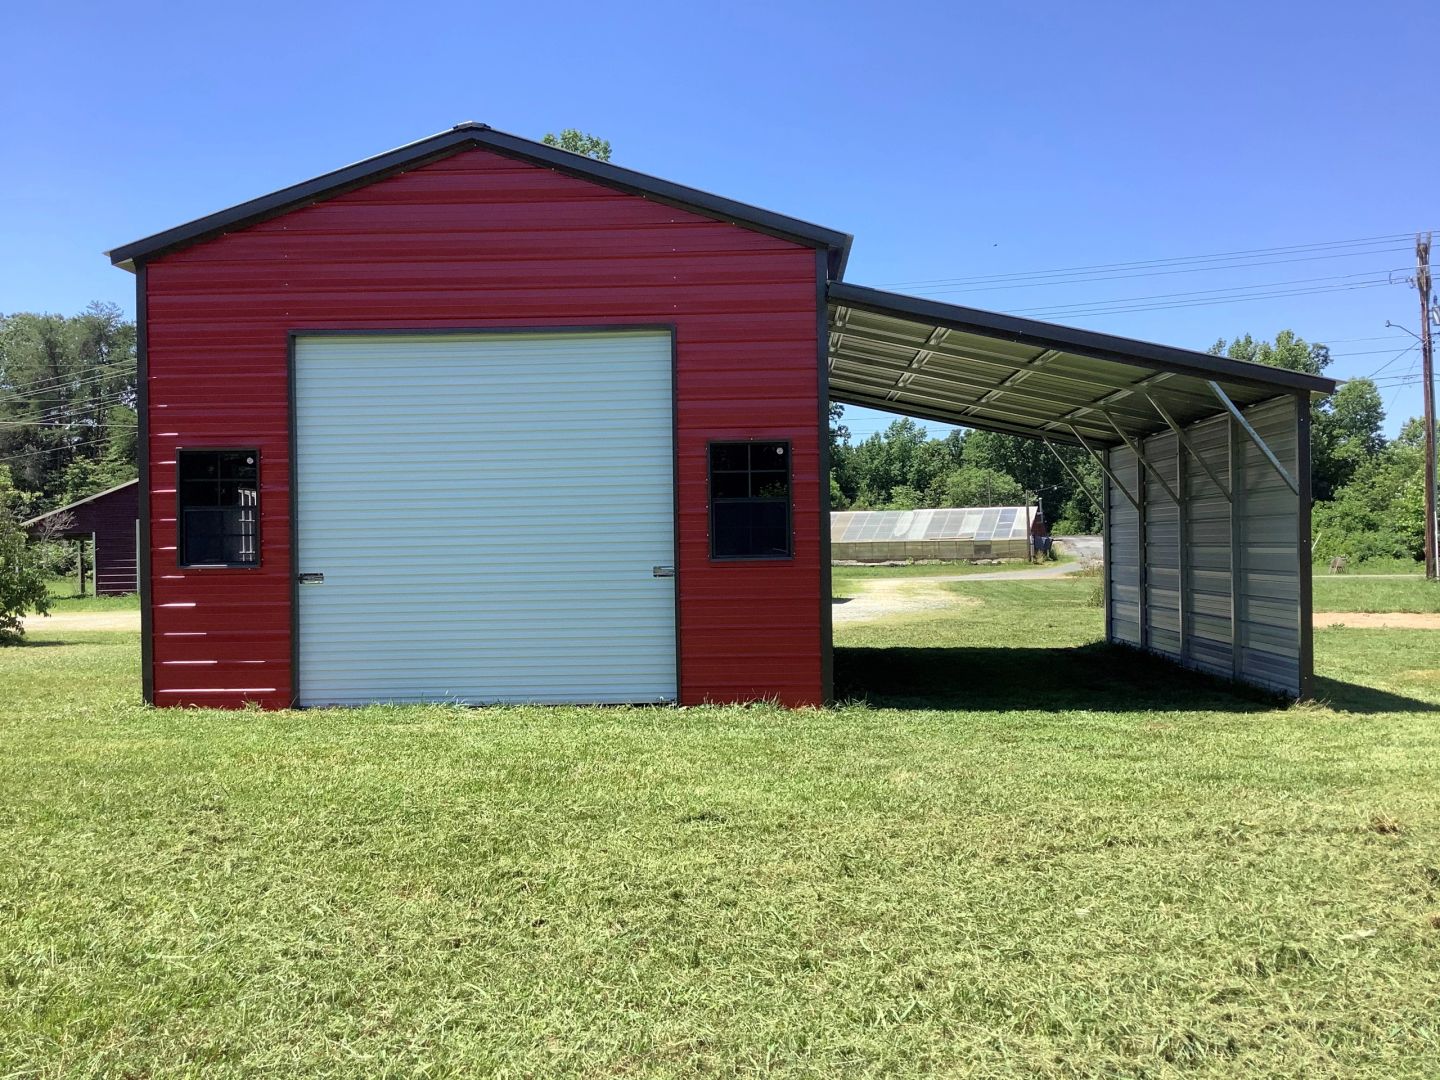 a red and white metal barn with a shed